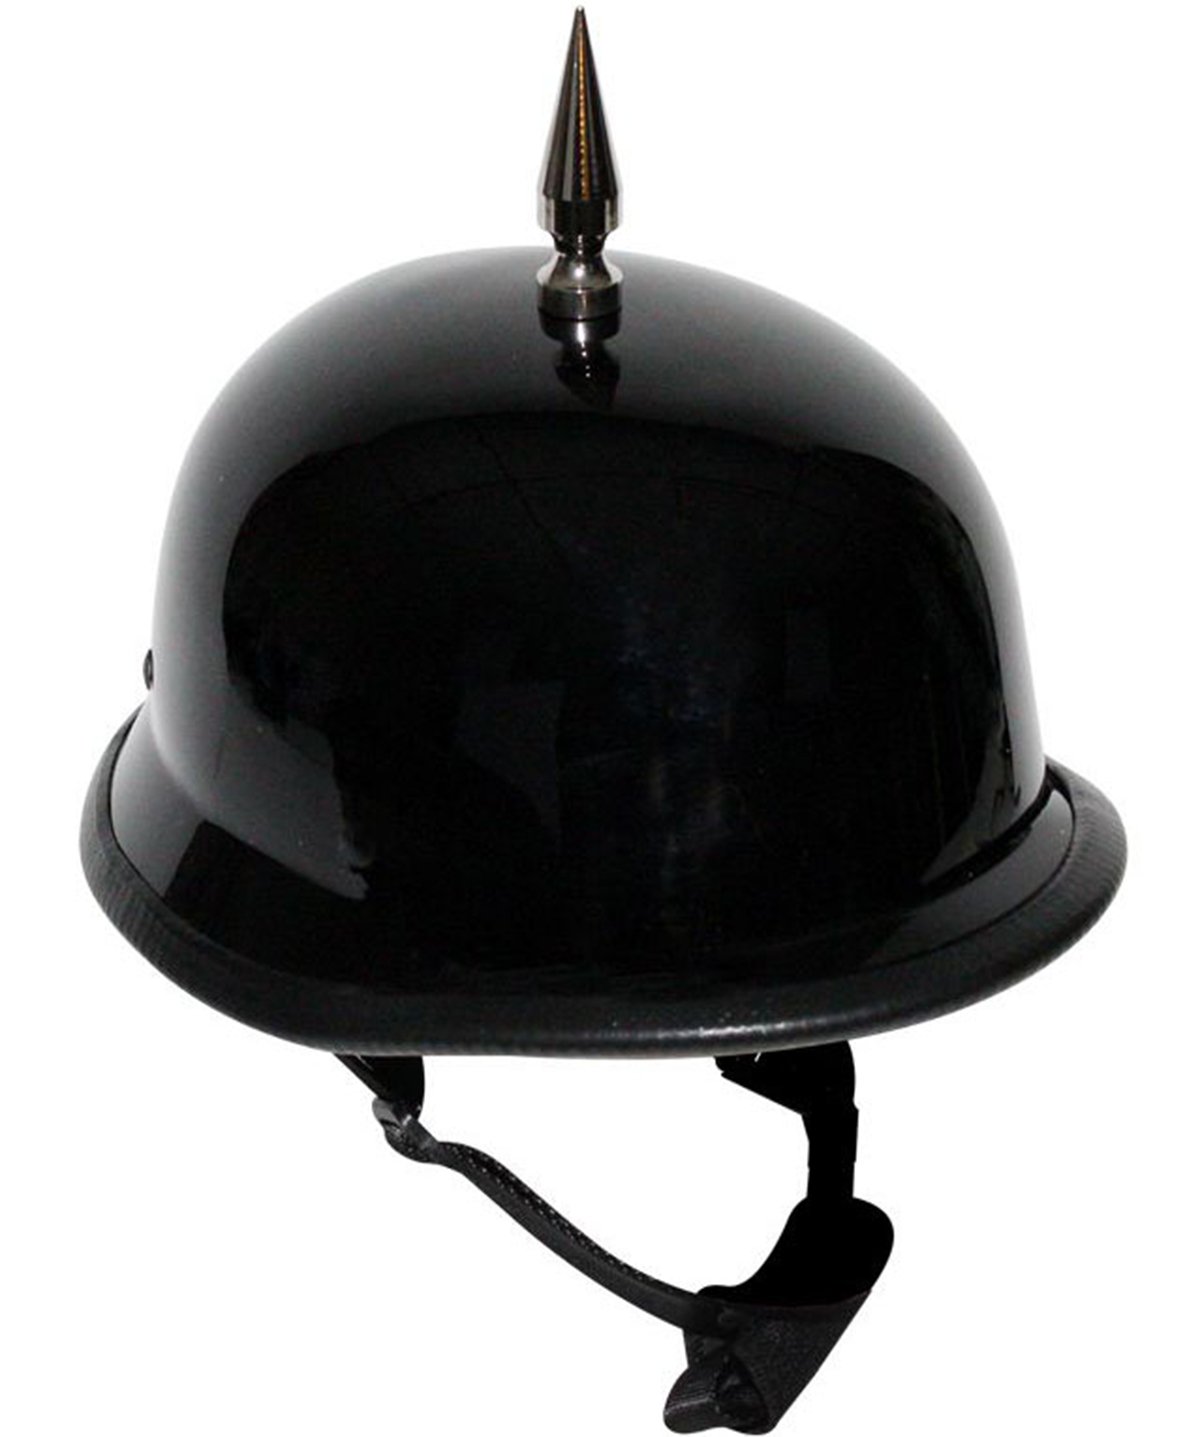 Gloss black novelty motorcycle helmet with spike.